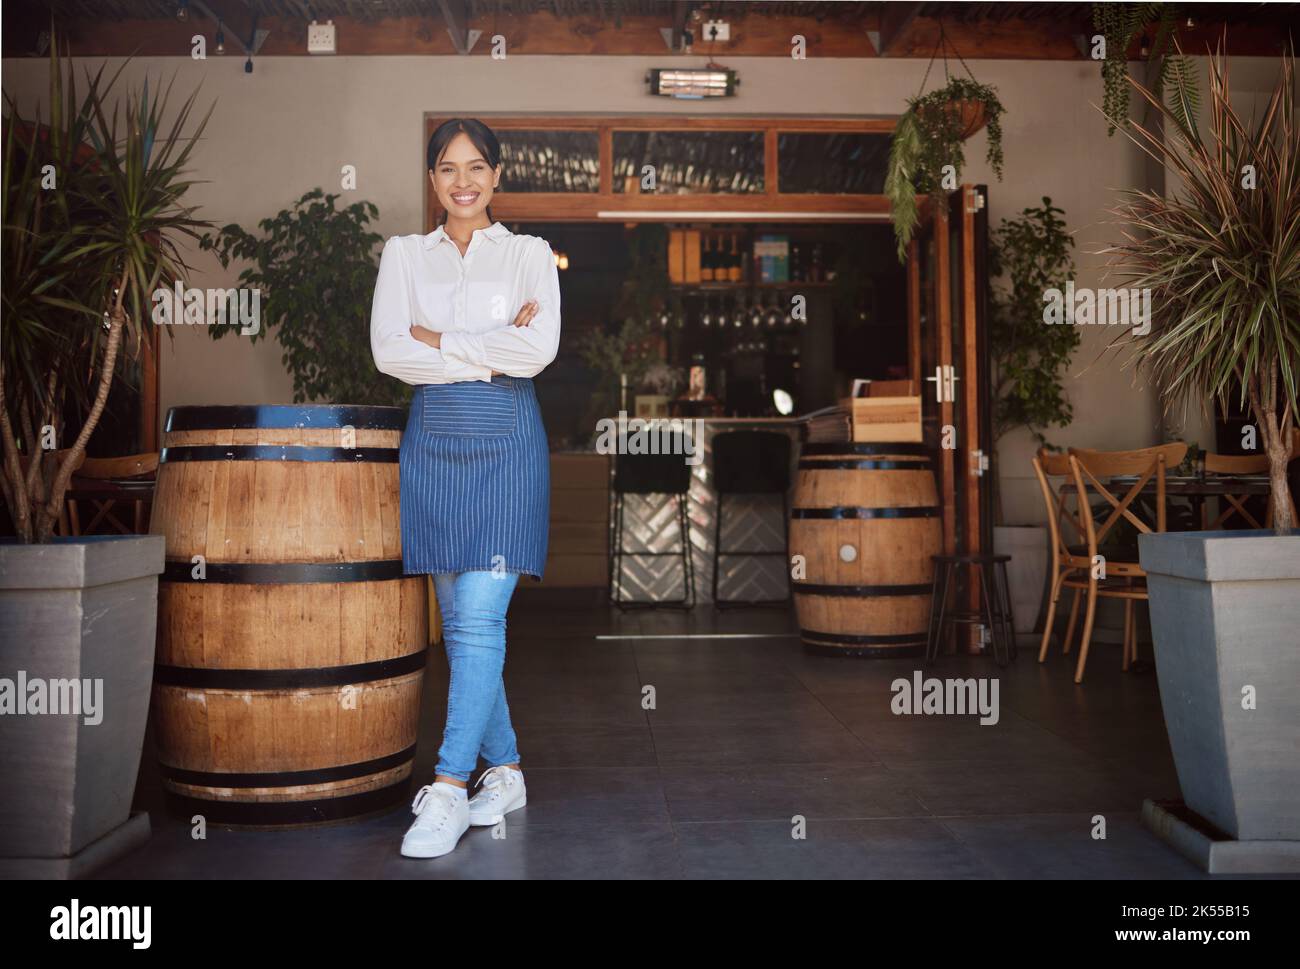 Winery restaurant, proud business owner woman in portrait for food, drink and hospitality industry. Vineyard waitress worker, bartender or manager Stock Photo